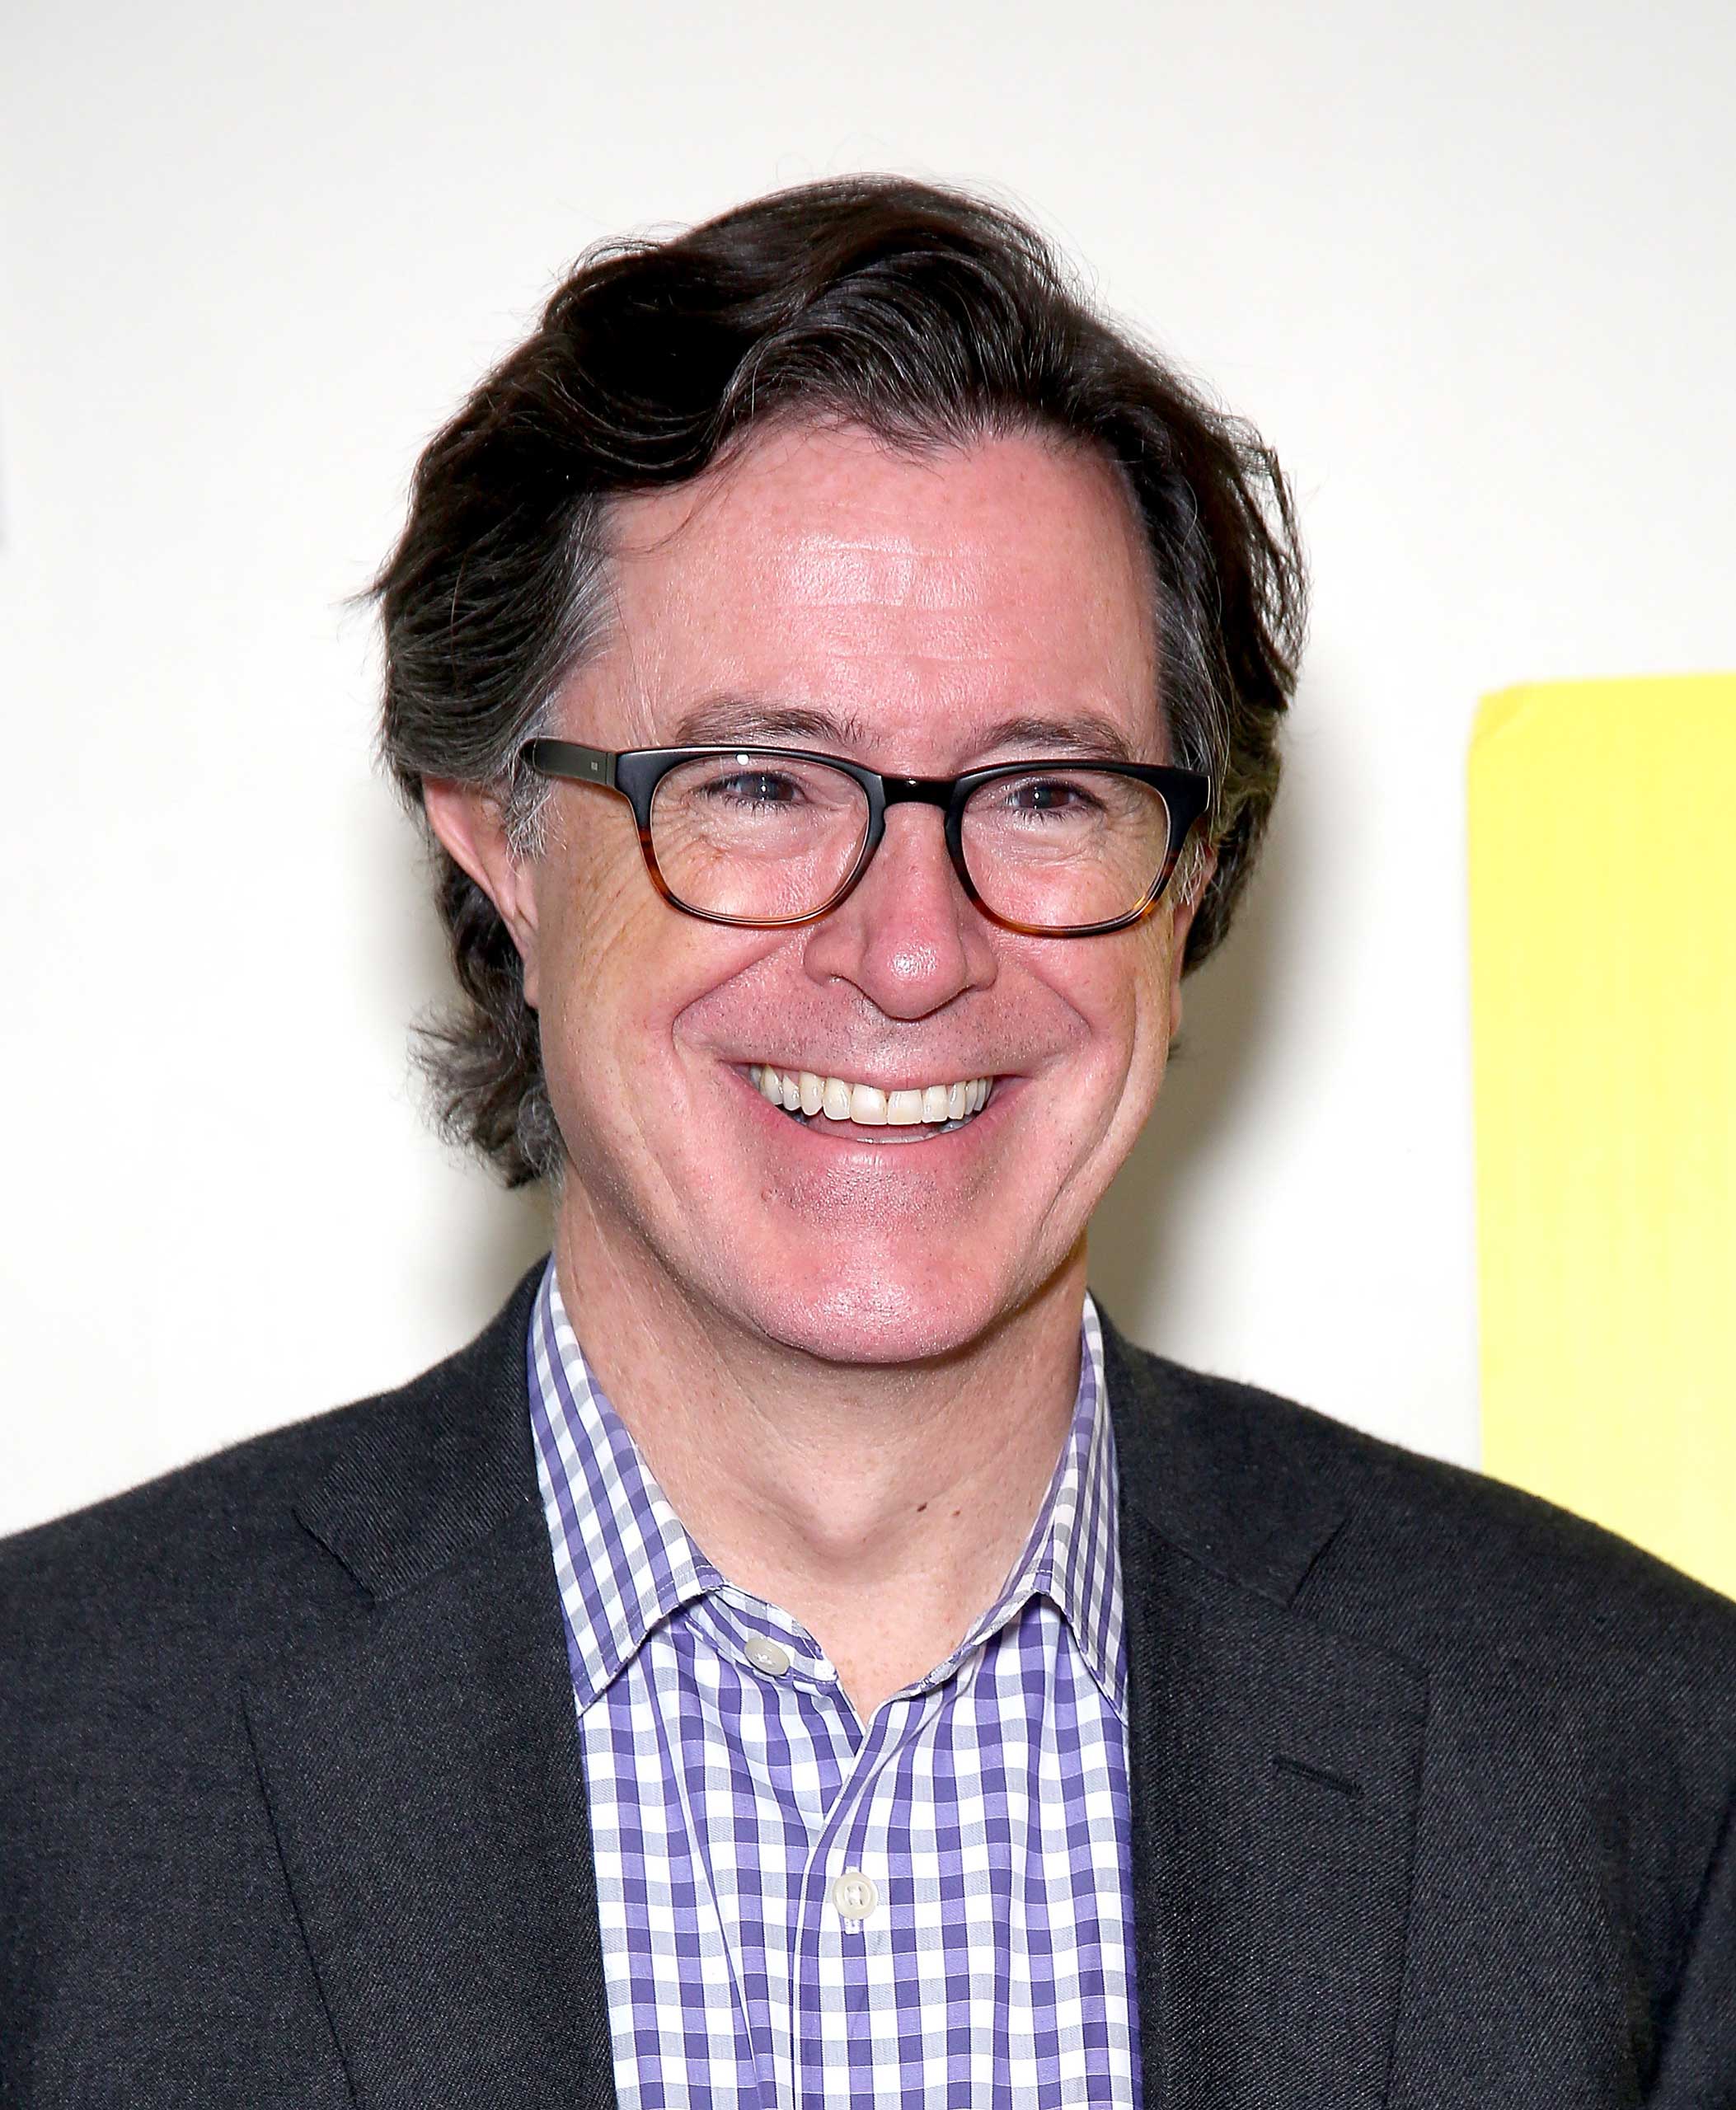 Stephen Colbert attends the 2015 Monclair Film Festival, In Conversation With Richard Gere Hosted By Stephen Colbert at the Wellmont Theatre in Montclair, N.J. on May 2, 2015. (Paul Zimmerma—Getty Images)